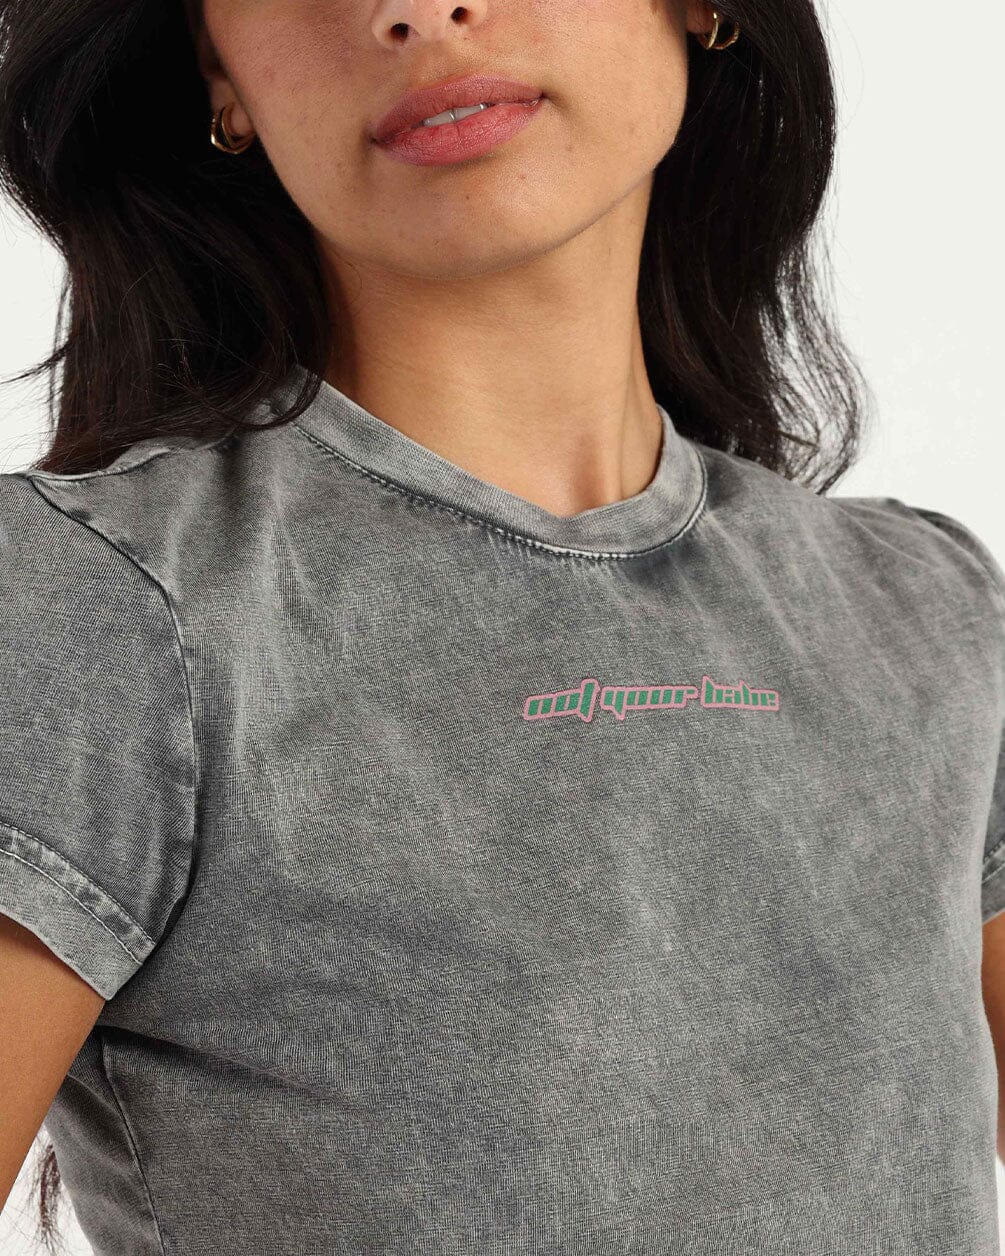 Not Your Baby Cropped Washed Tee Statement Cropped Tee IN YOUR SHOE S 